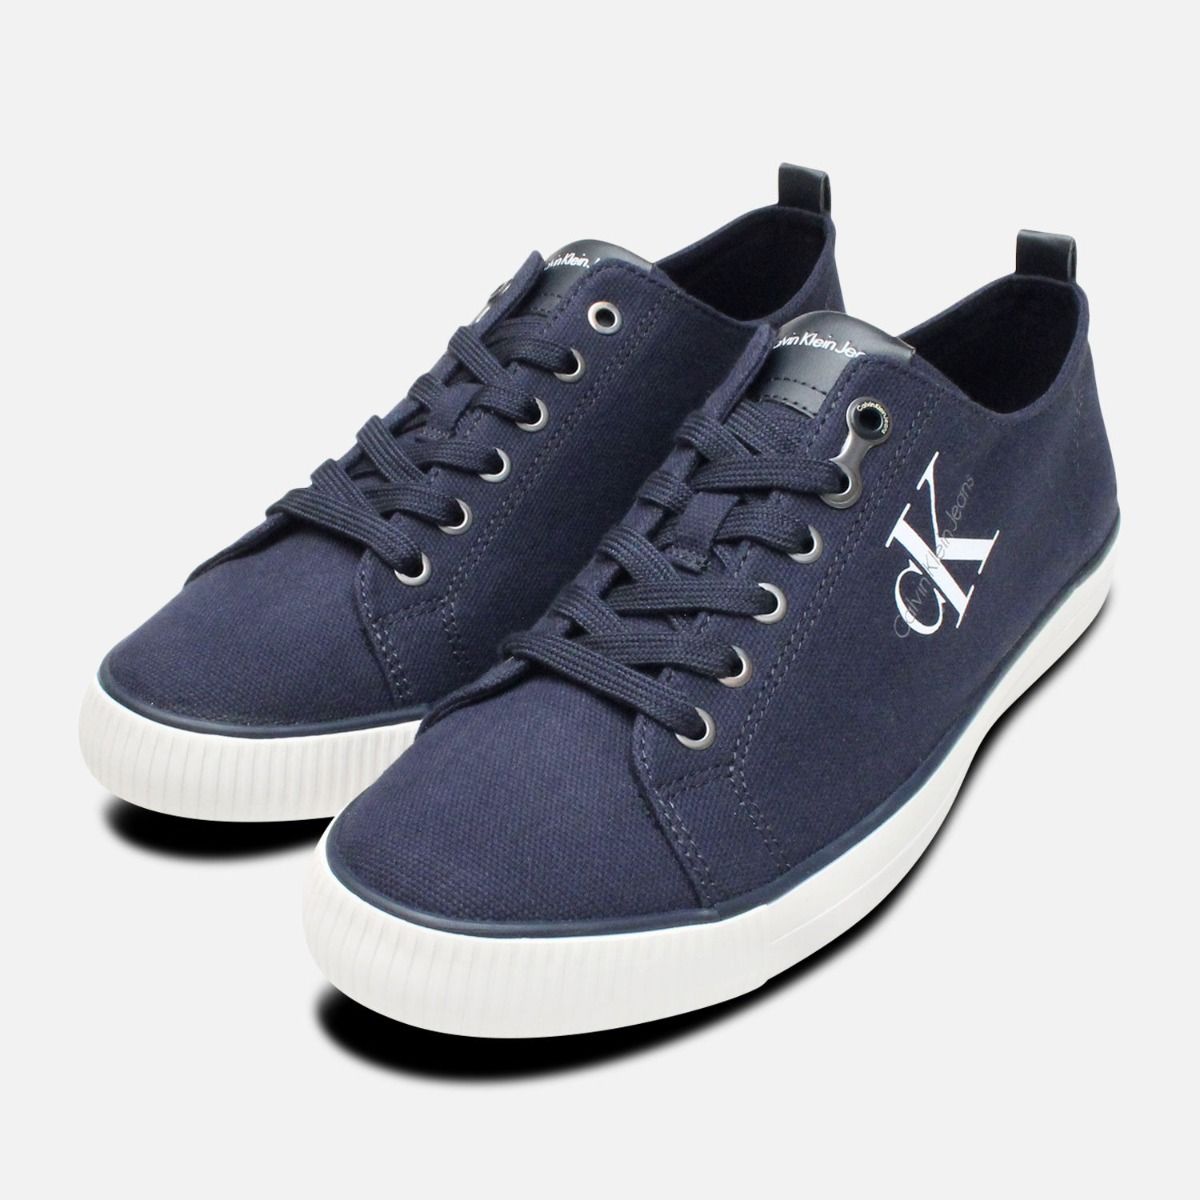 blue canvas trainers